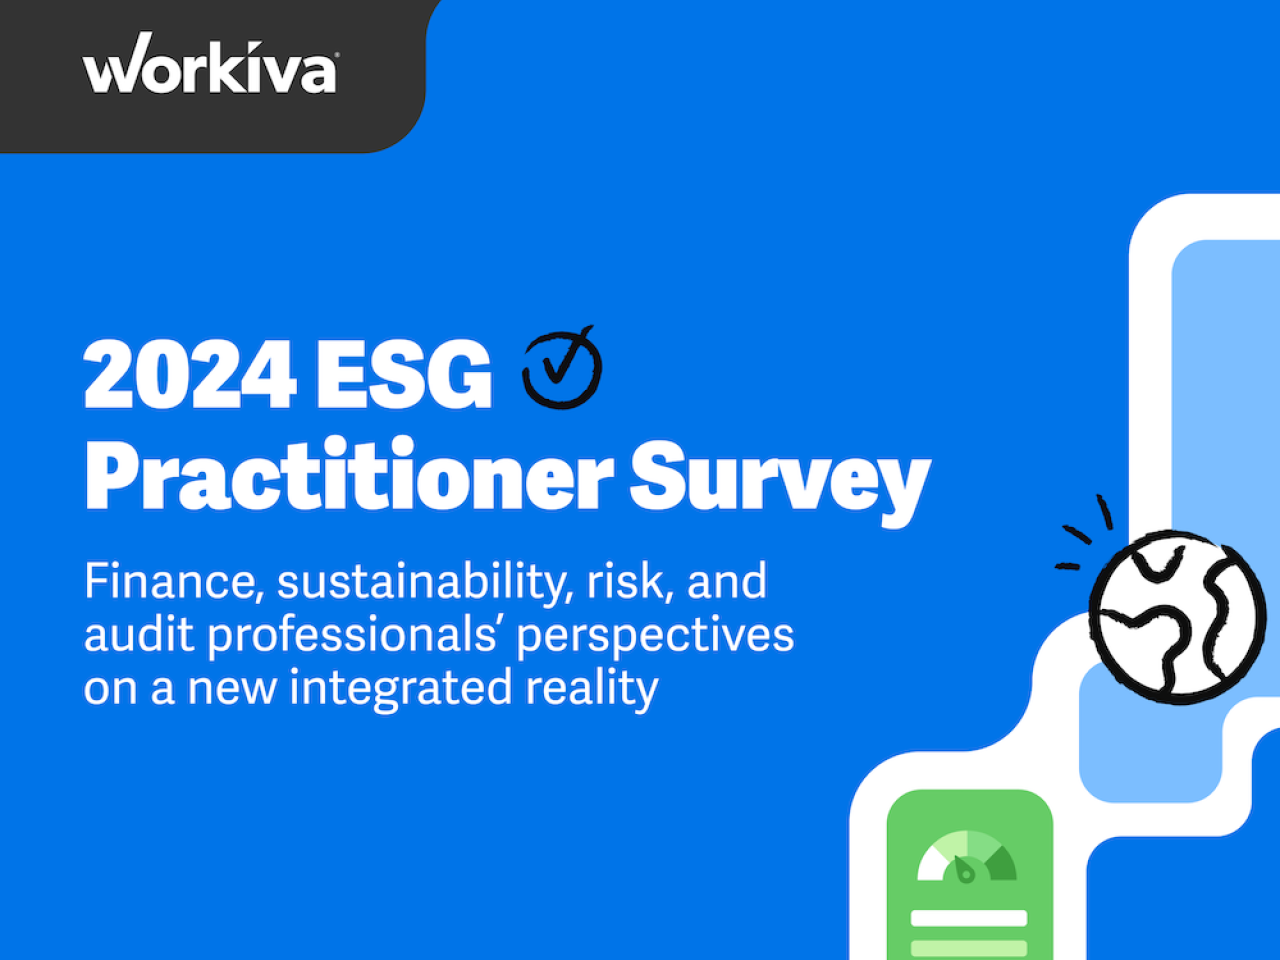 Workiva 2024 ESG Practitioner Survey. Finance, sustainability, risk and audit professionals' perspectives on a new integrated reality. 